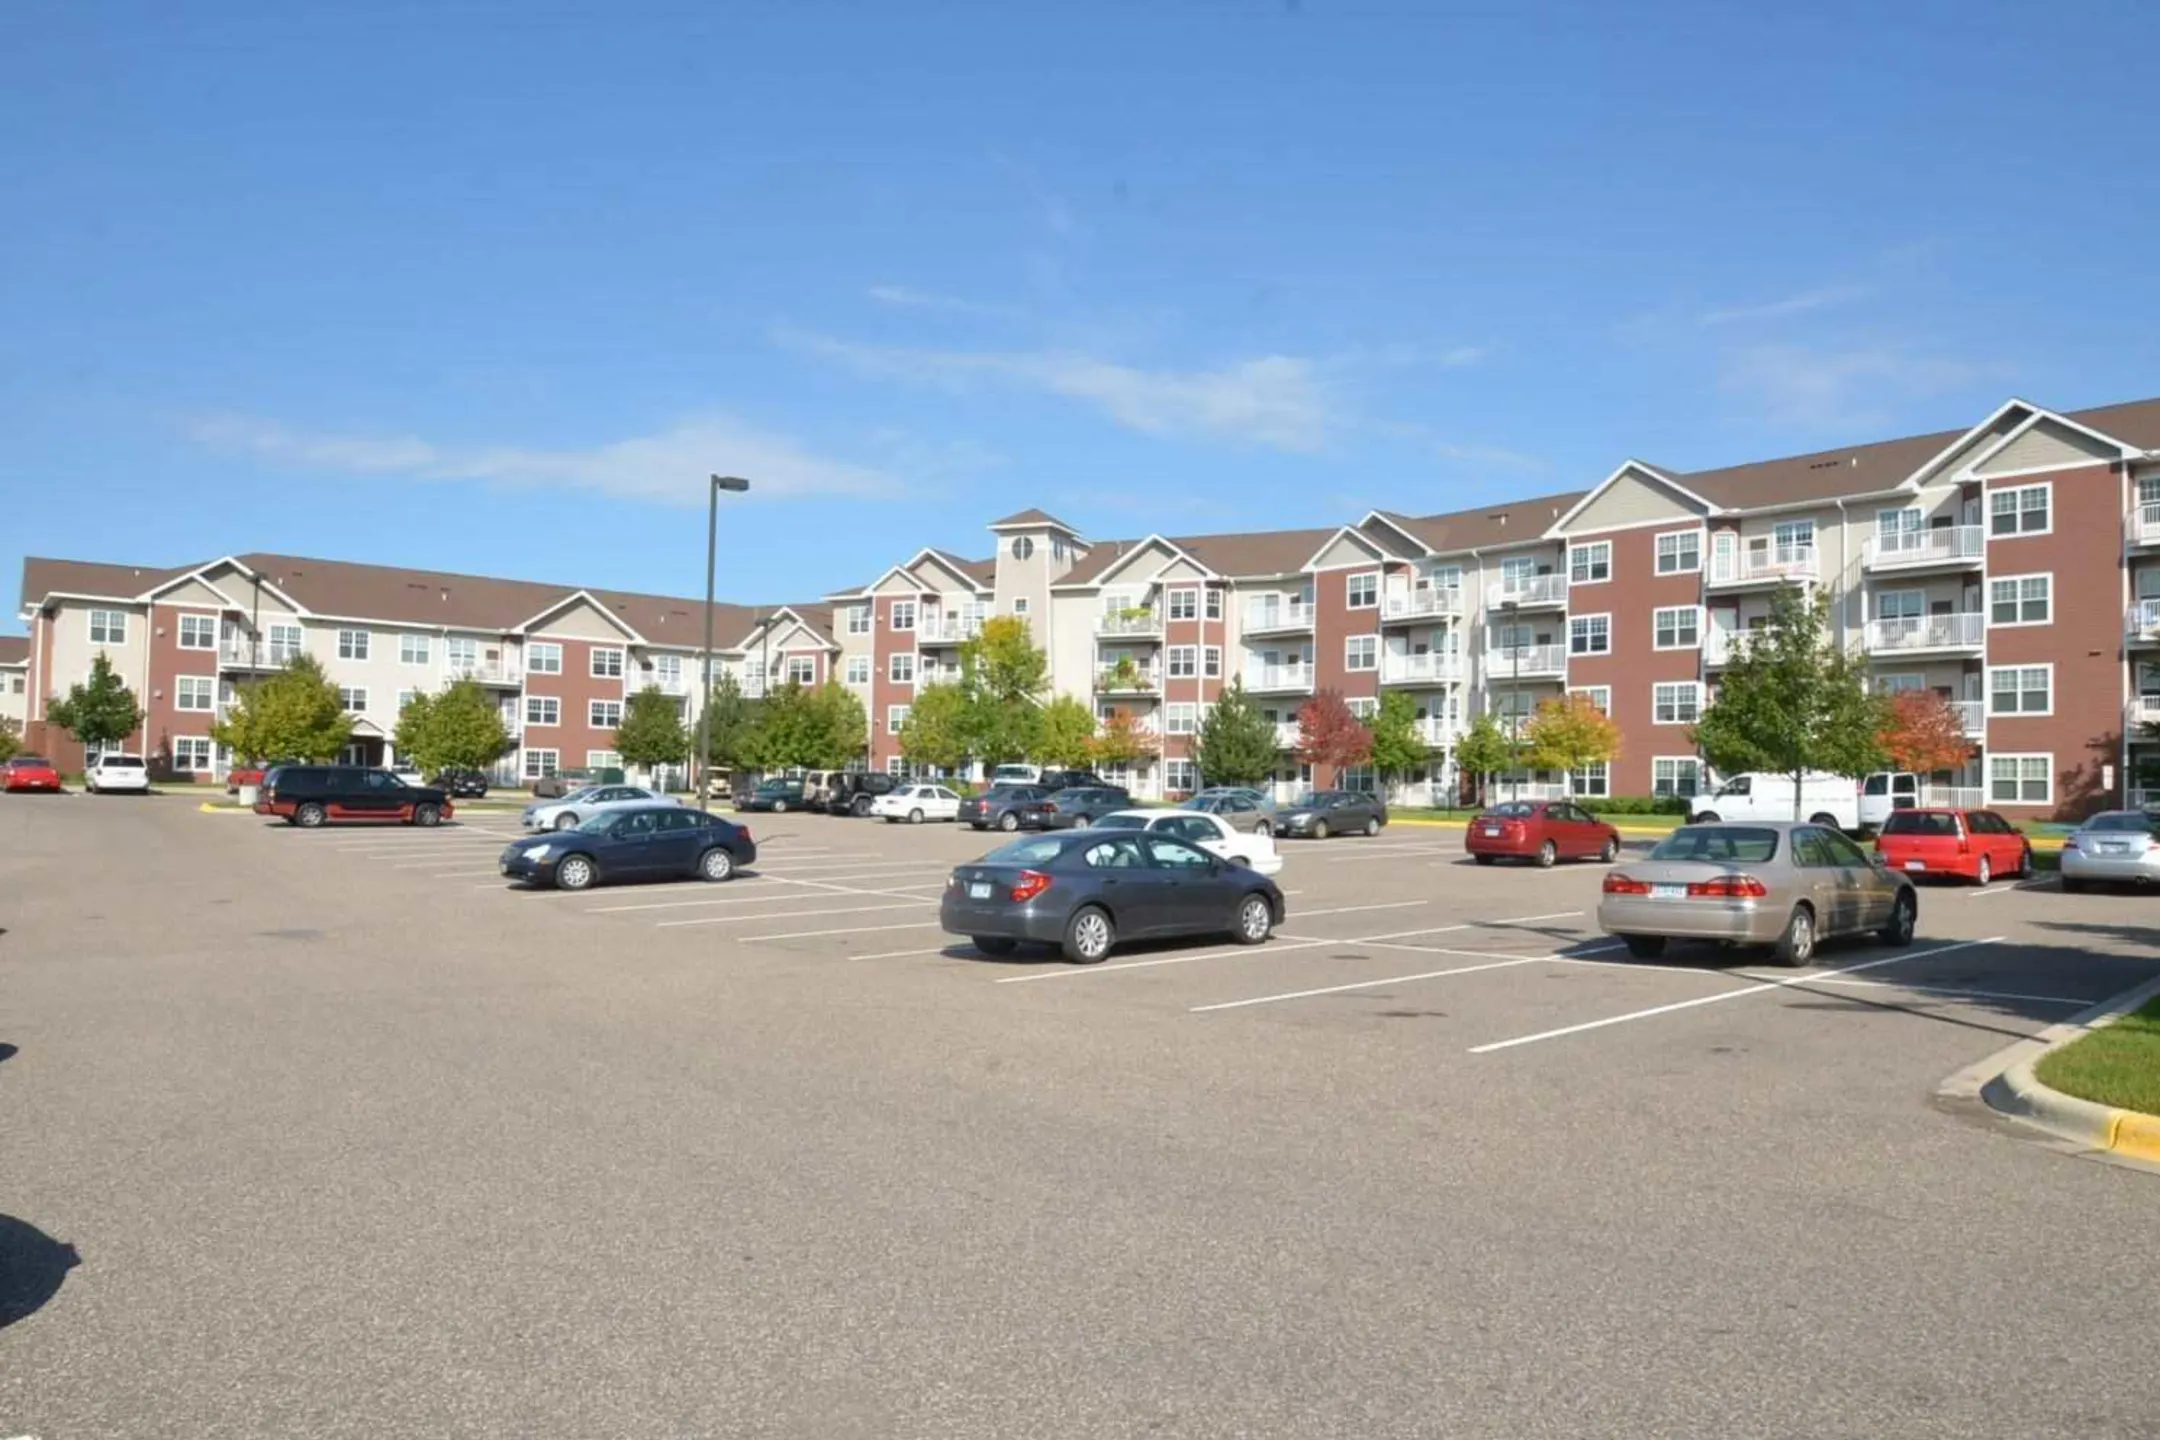 Building - Blackberry Pointe Apartments - Inver Grove Heights, MN